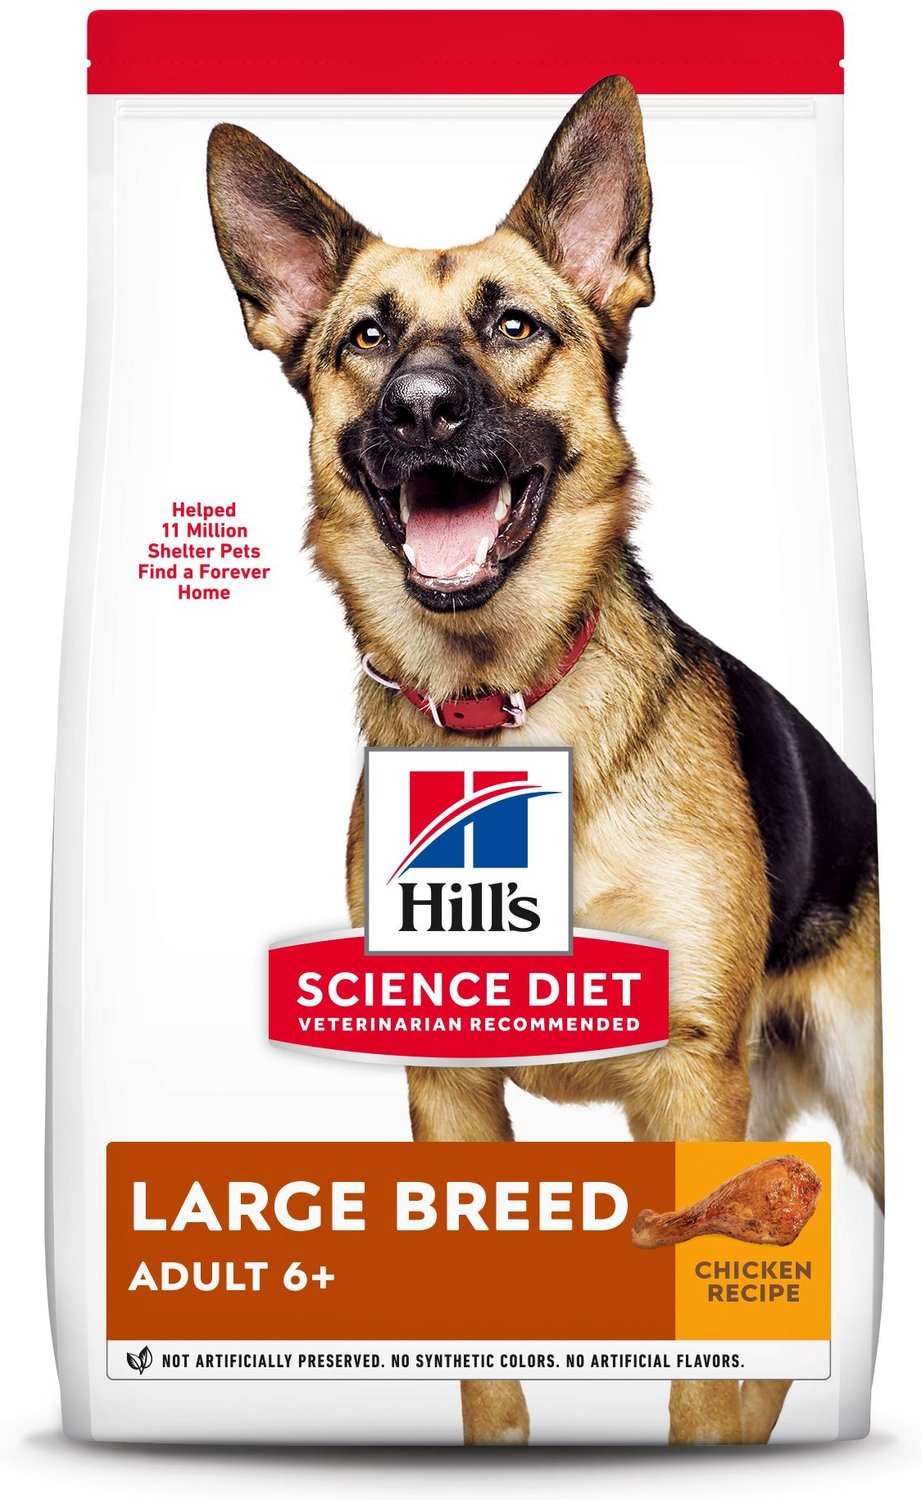 Hill's Science Diet Adult 6+ Large Breed Dry Dog Food